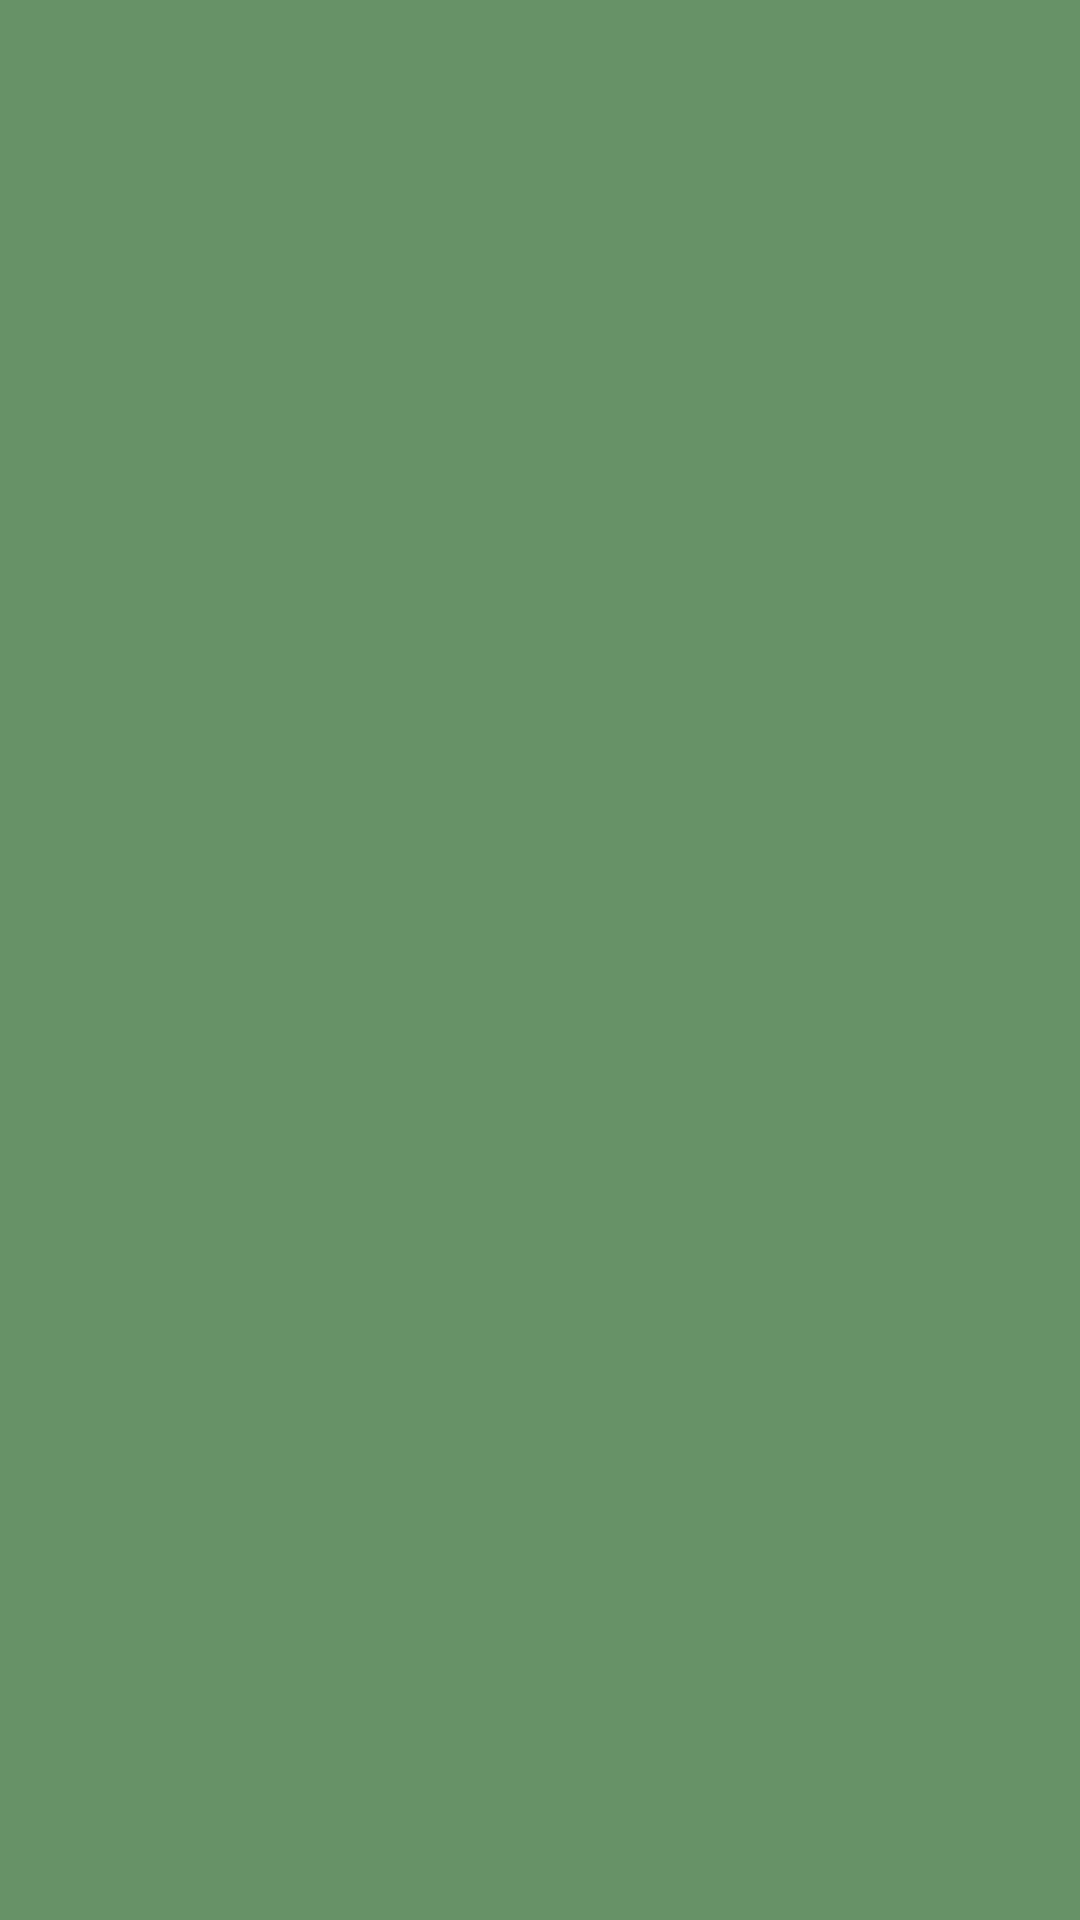 1080x1920 Russian Green Solid Color Background